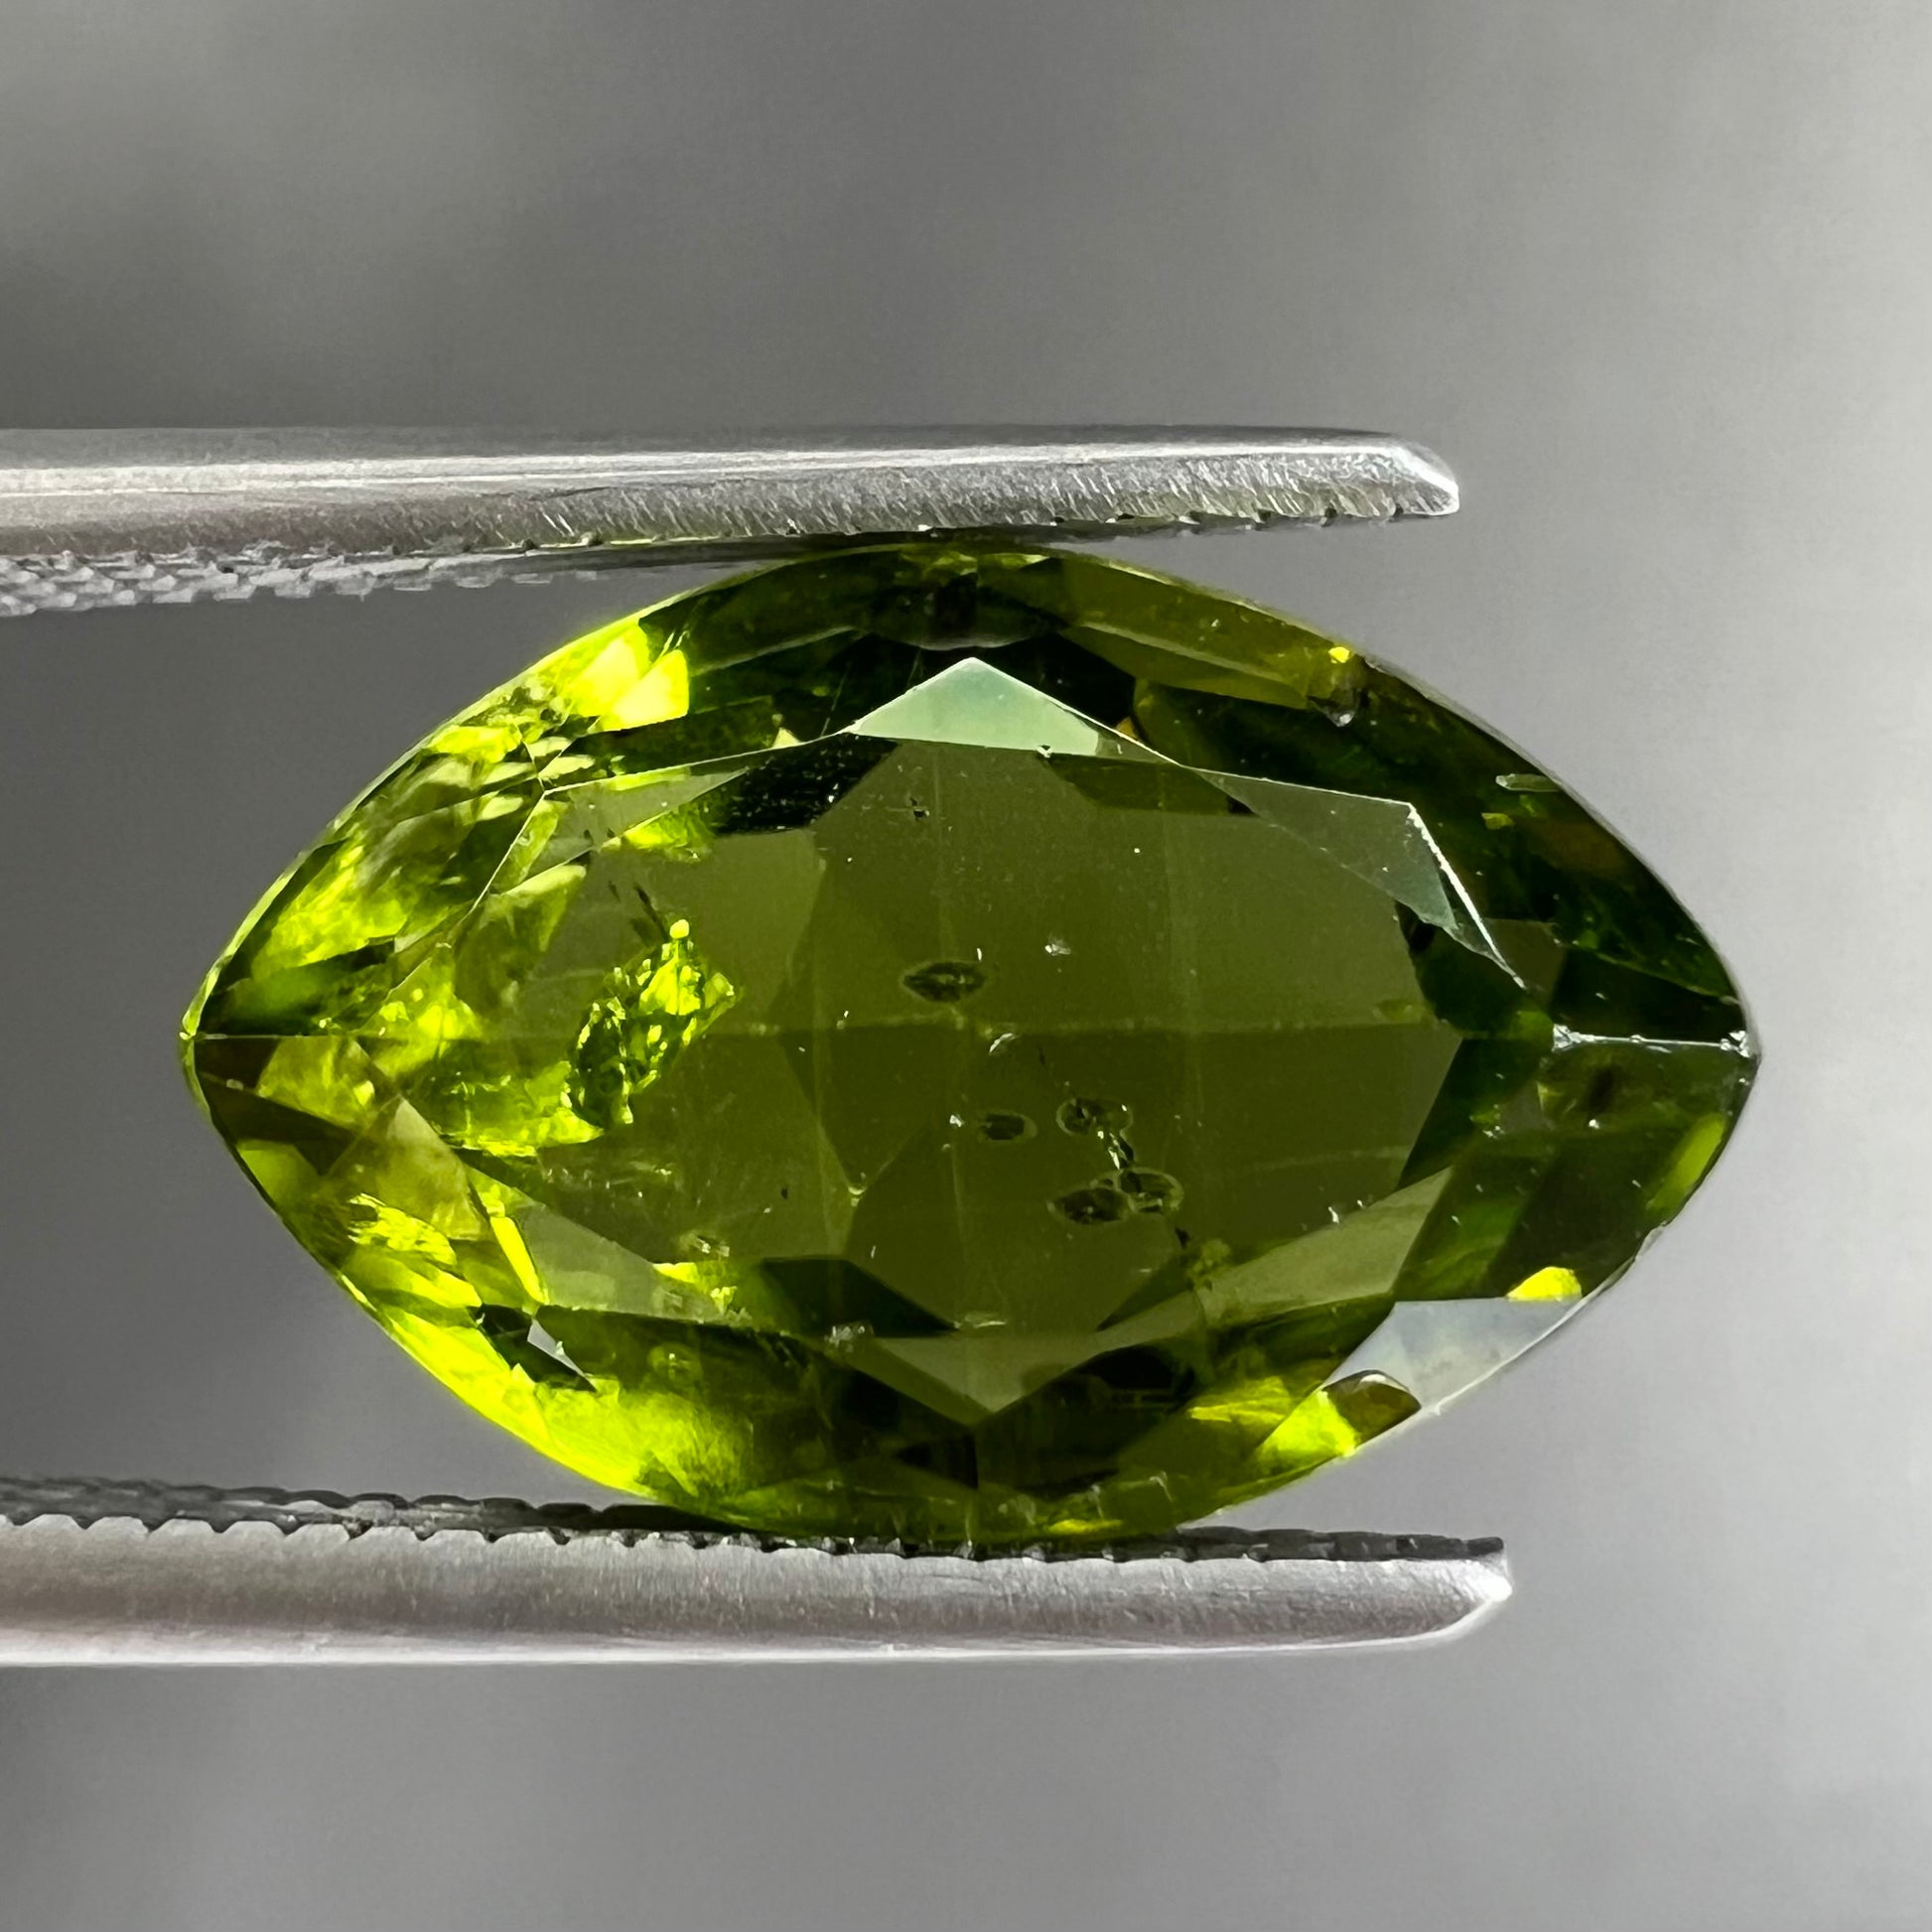 A loose, marquise cut peridot gemstone.  The stone is an olive green color.